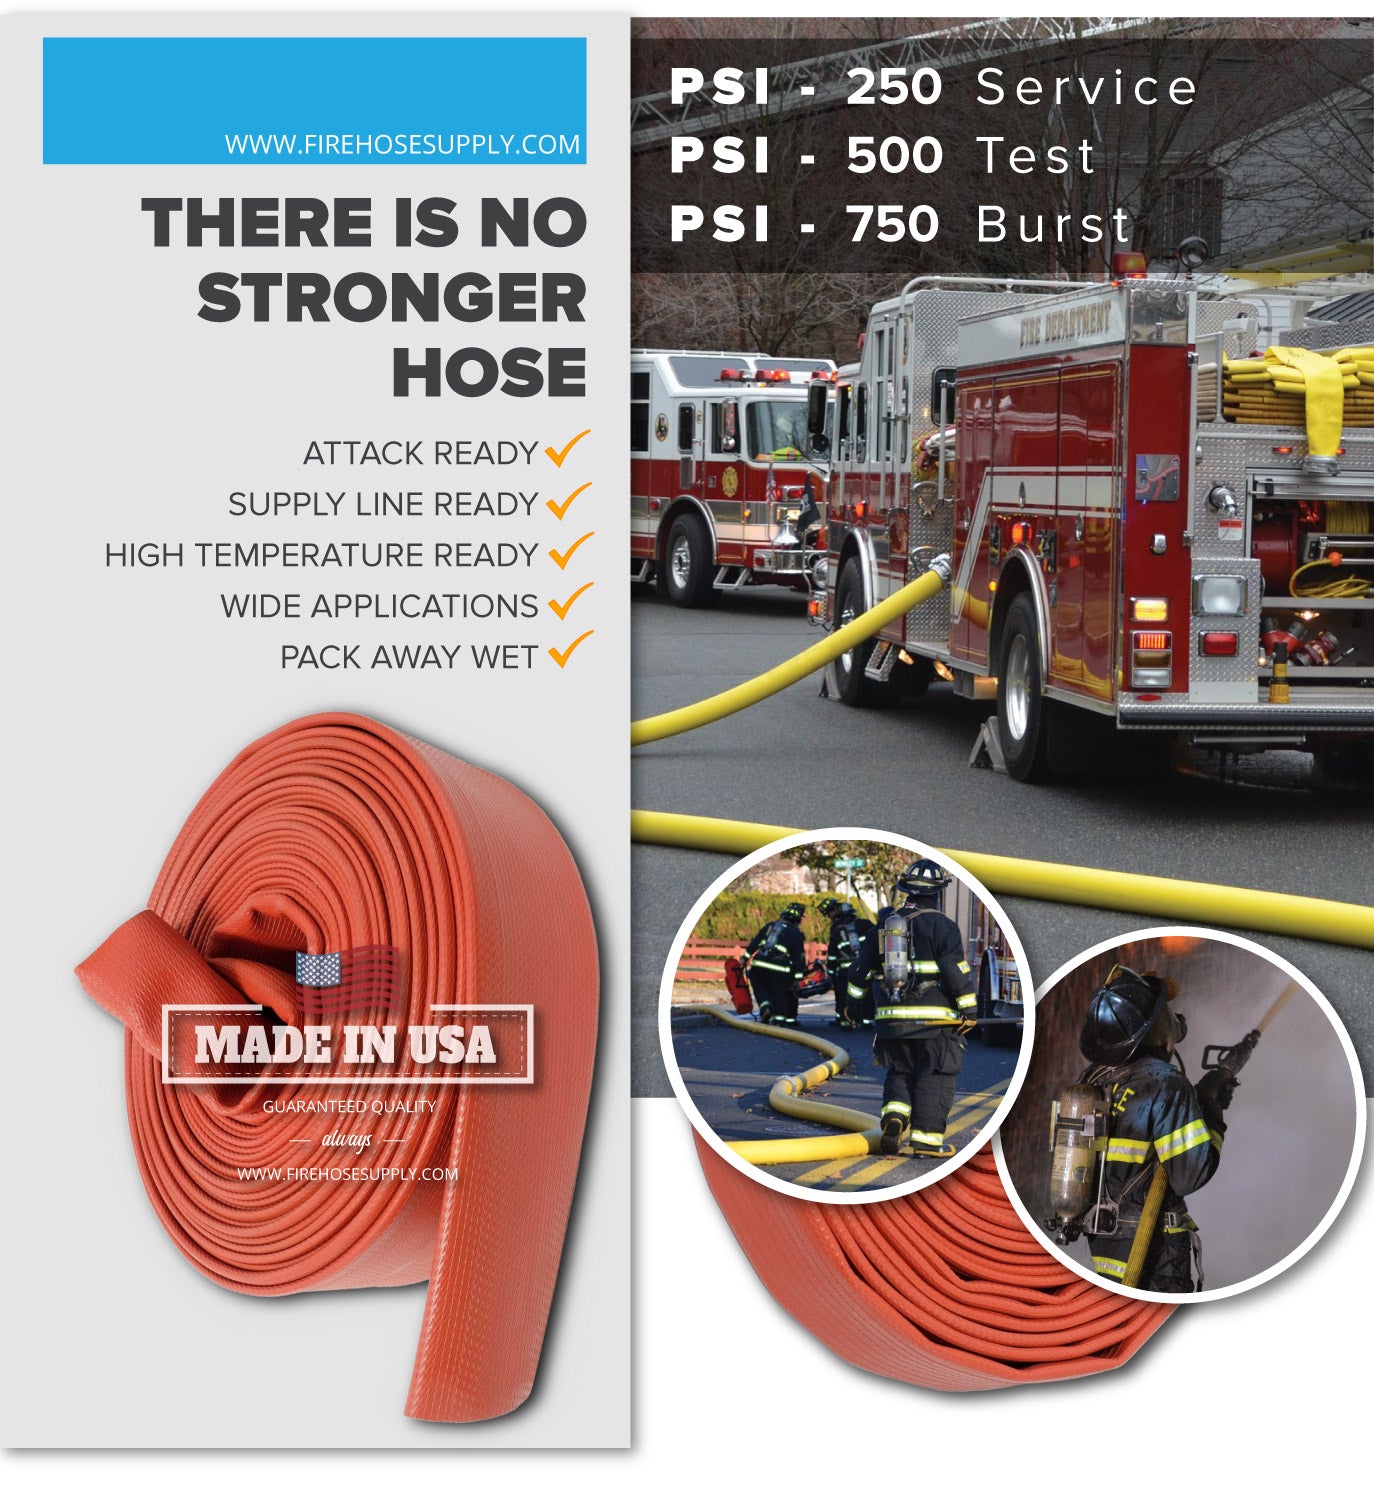 4 Inch Rubber Fire Hose Material Only Supply And Attack Ready Firefighter Red 500 PSI Test